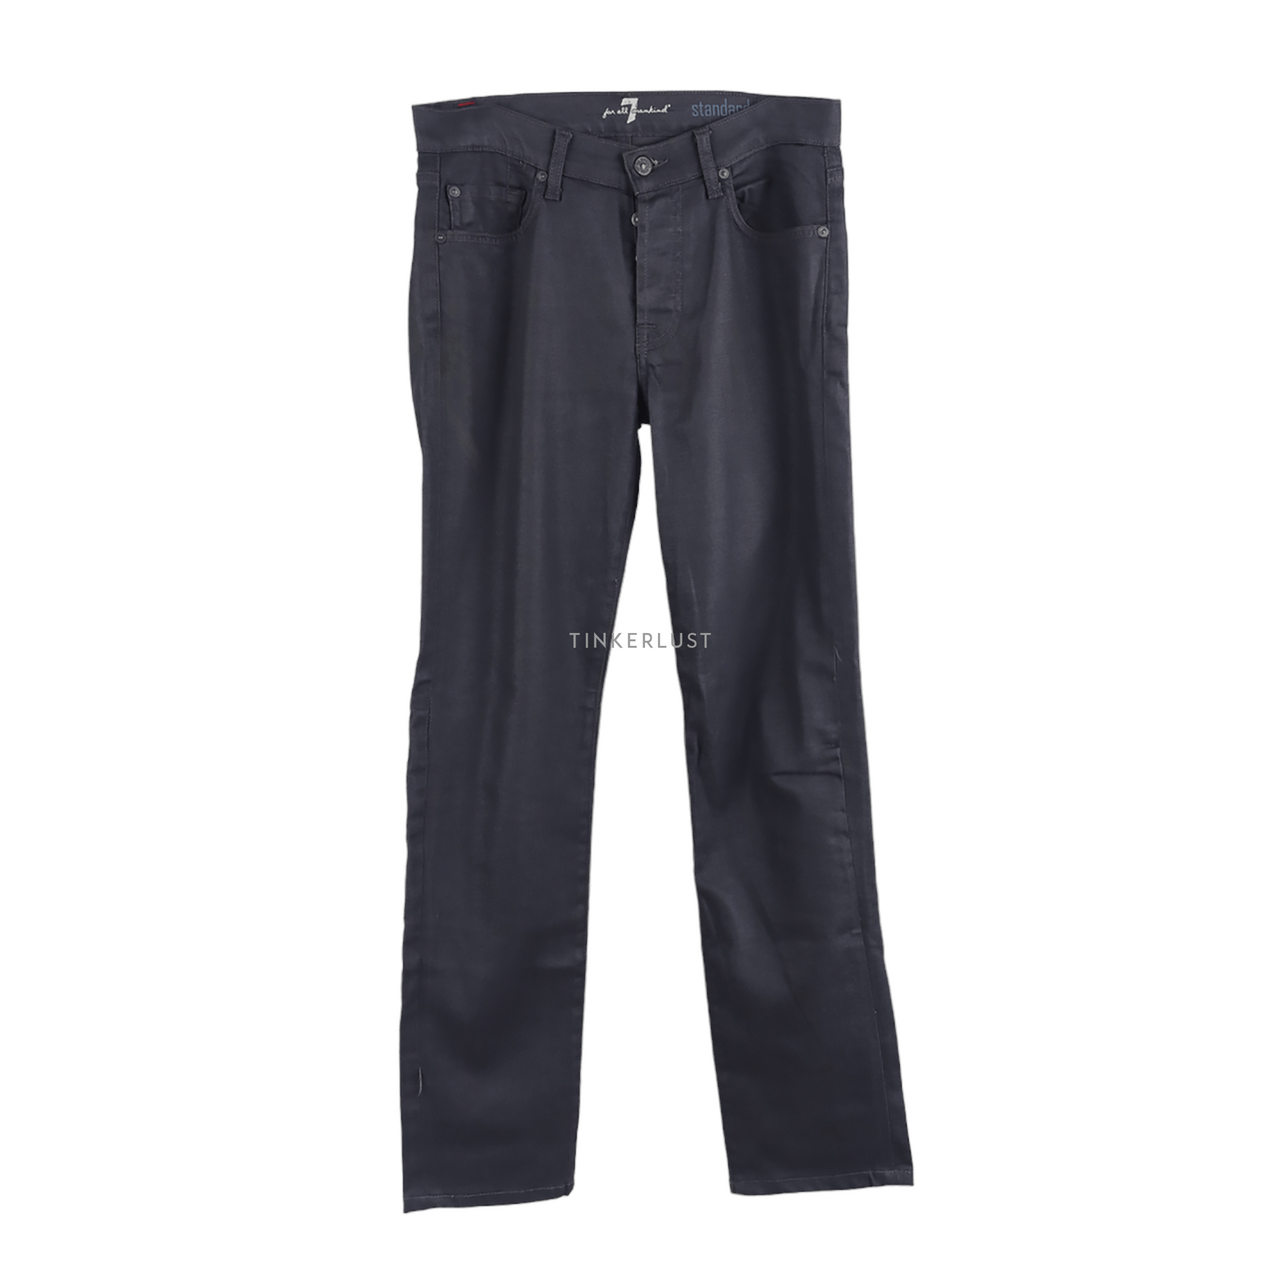 7 For All Mankind Dark Grey Long Pants